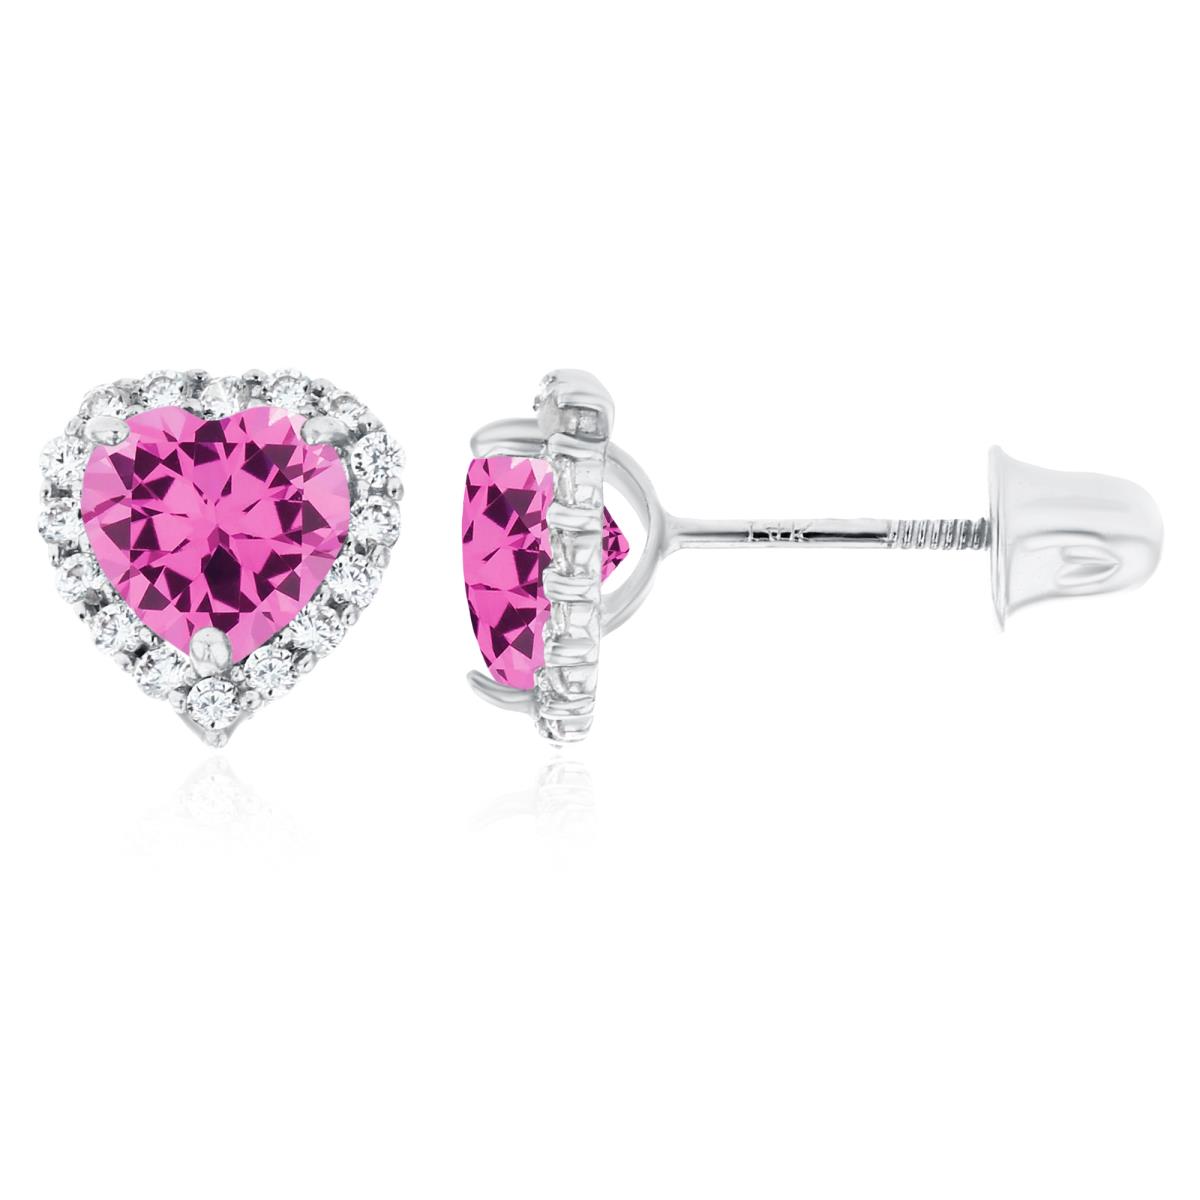 14K White Gold 5mm Heart Created Pink Sapphire & 1mm Created White Sapphire Halo Screwback Earrings